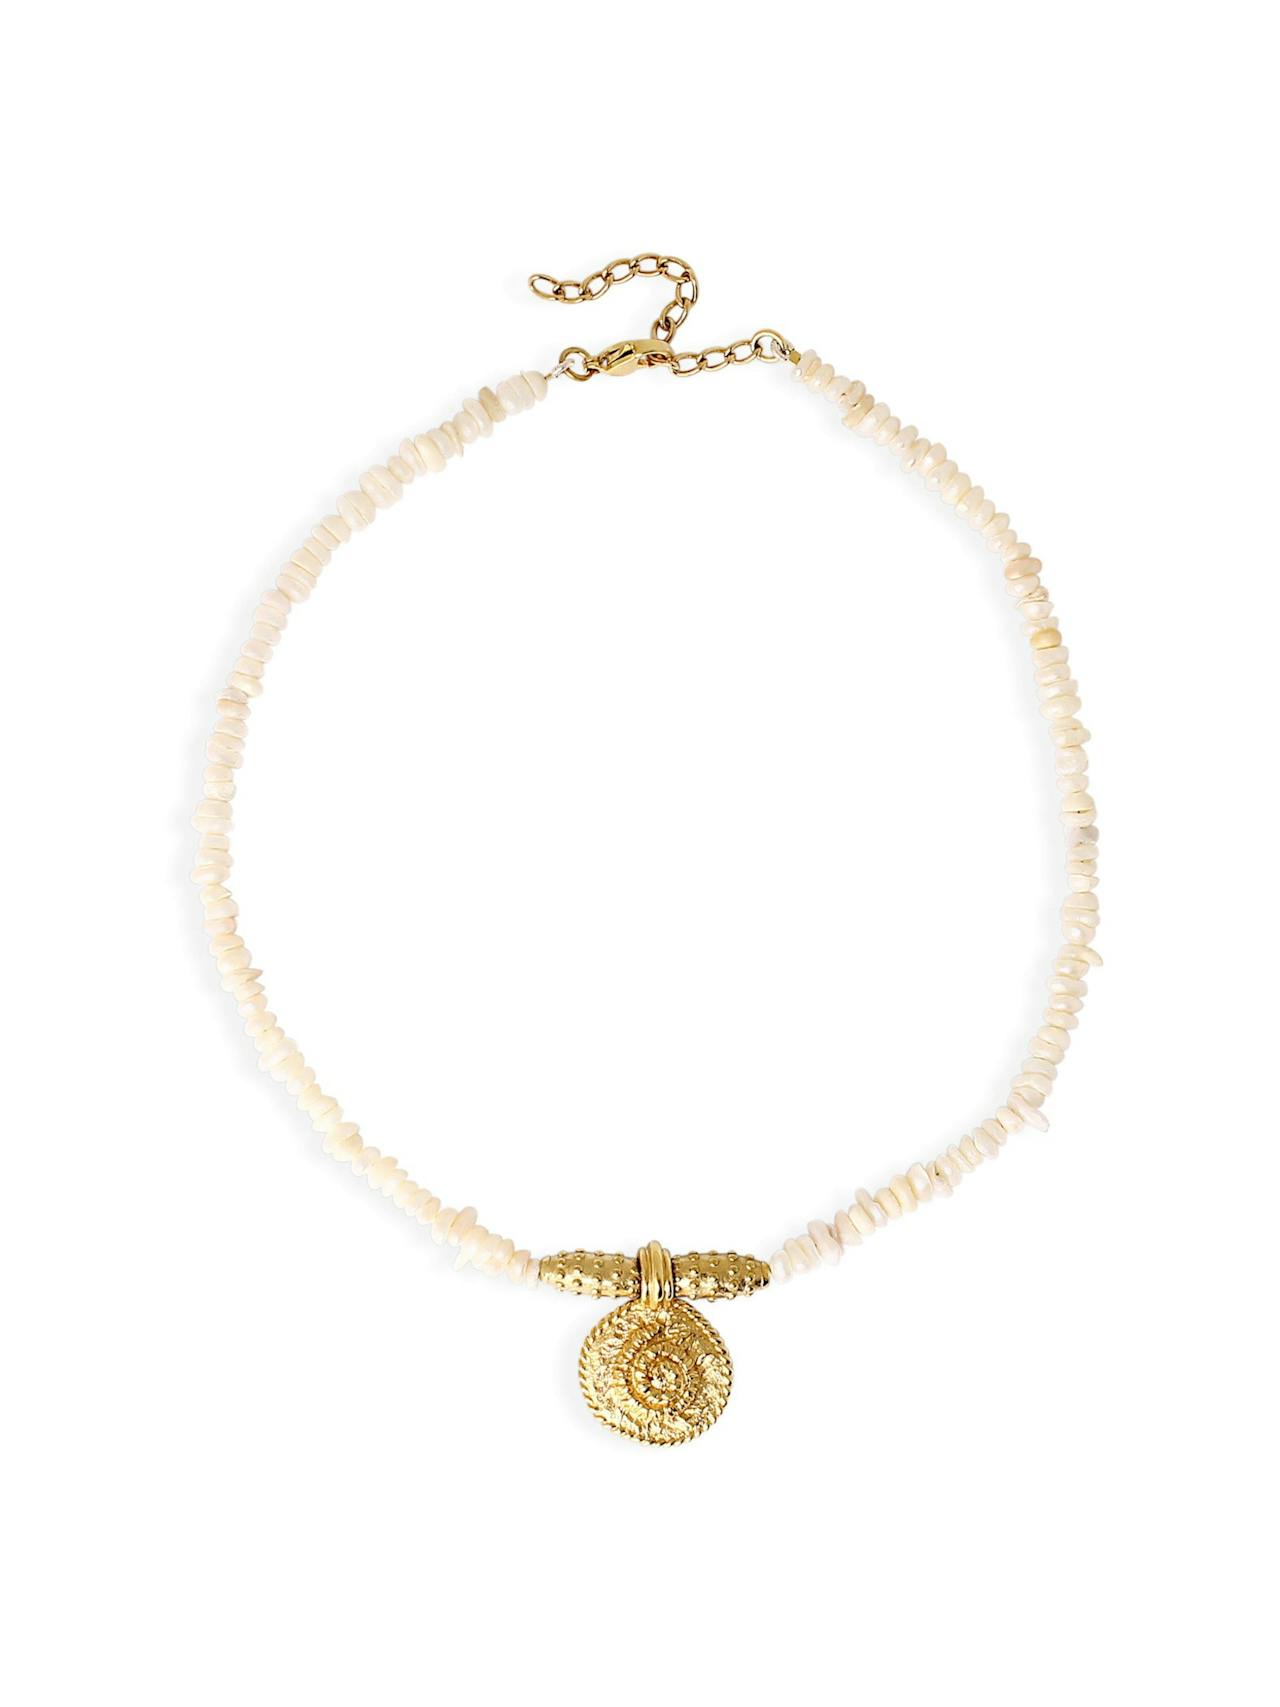 Gold with pearls Adella necklace